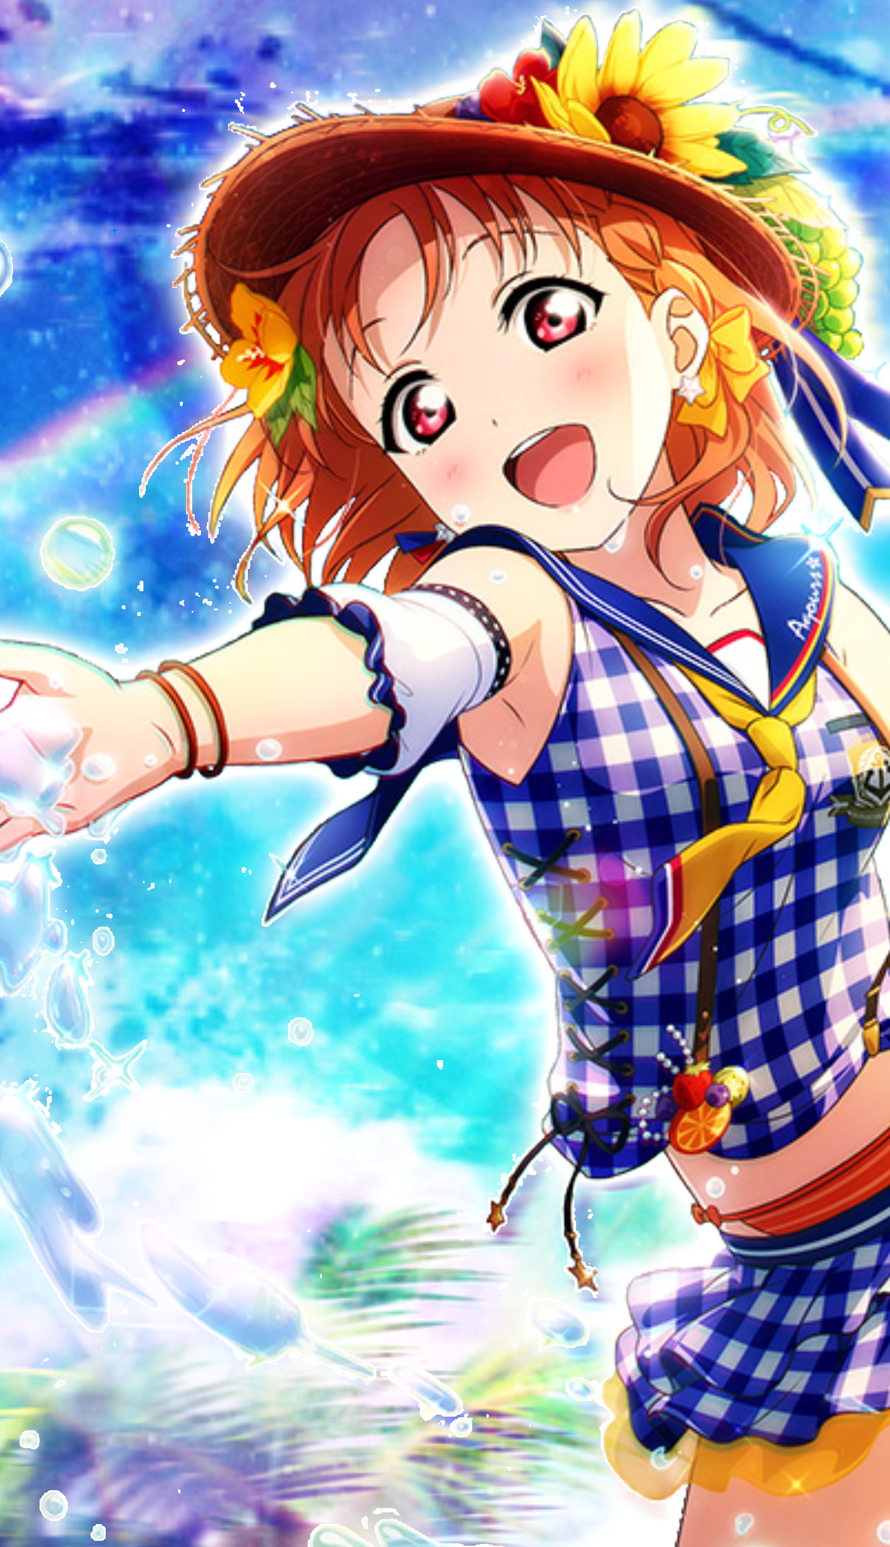 Just a random edit I did for chika's b day